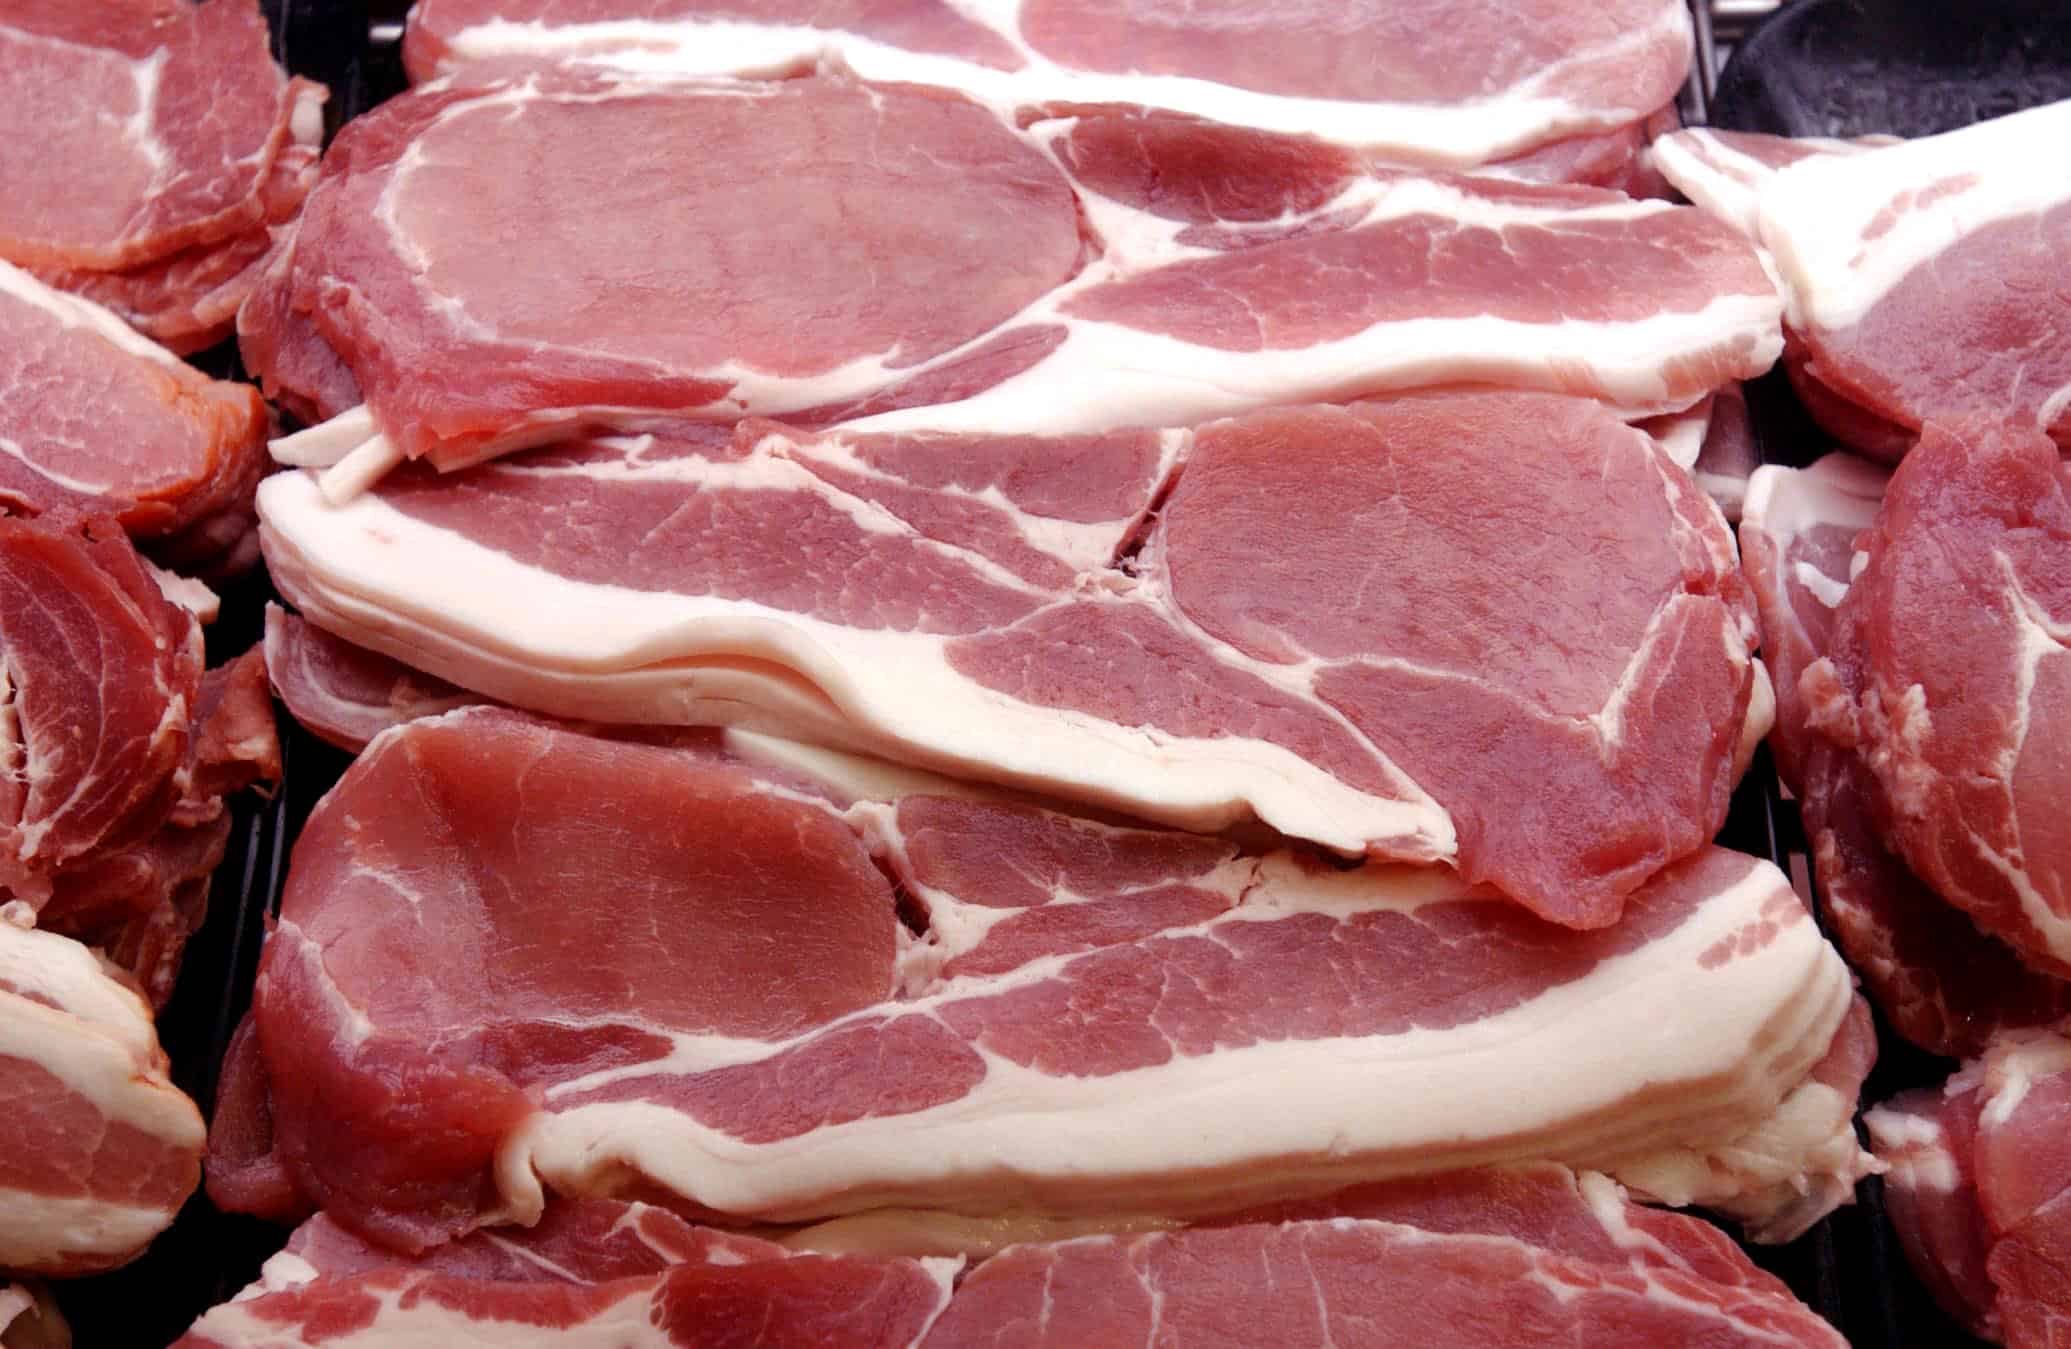 Brits have cut meat-eating by 17% in a decade – but it’s not enough